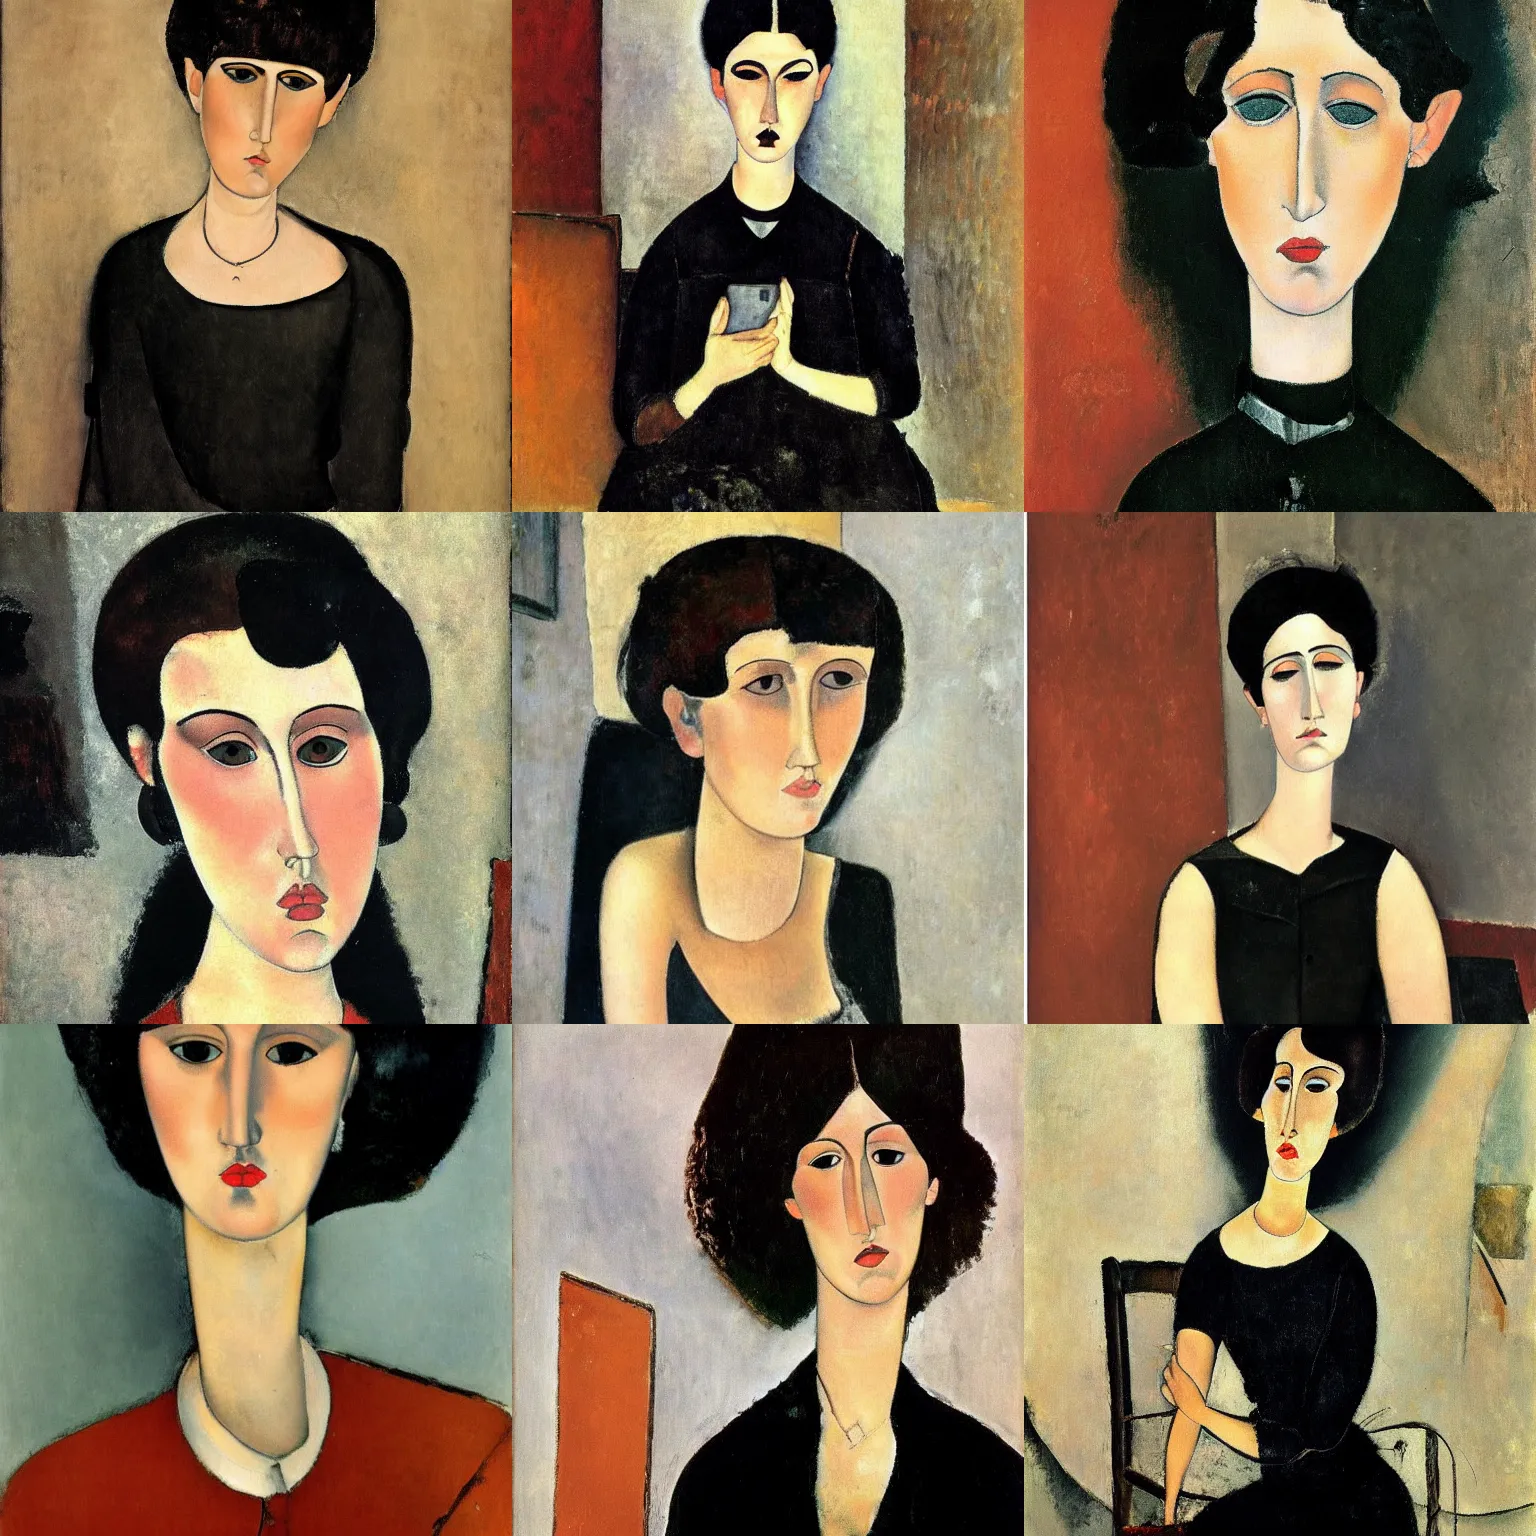 Prompt: A goth portrait painted by Amedeo Modigliani. Her hair is dark brown and cut into a short, messy pixie cut. She has a slightly rounded face, with a pointed chin, large entirely-black eyes, and a small nose. She is wearing a black tank top, a black leather jacket, a black knee-length skirt, a black choker, and black leather boots.